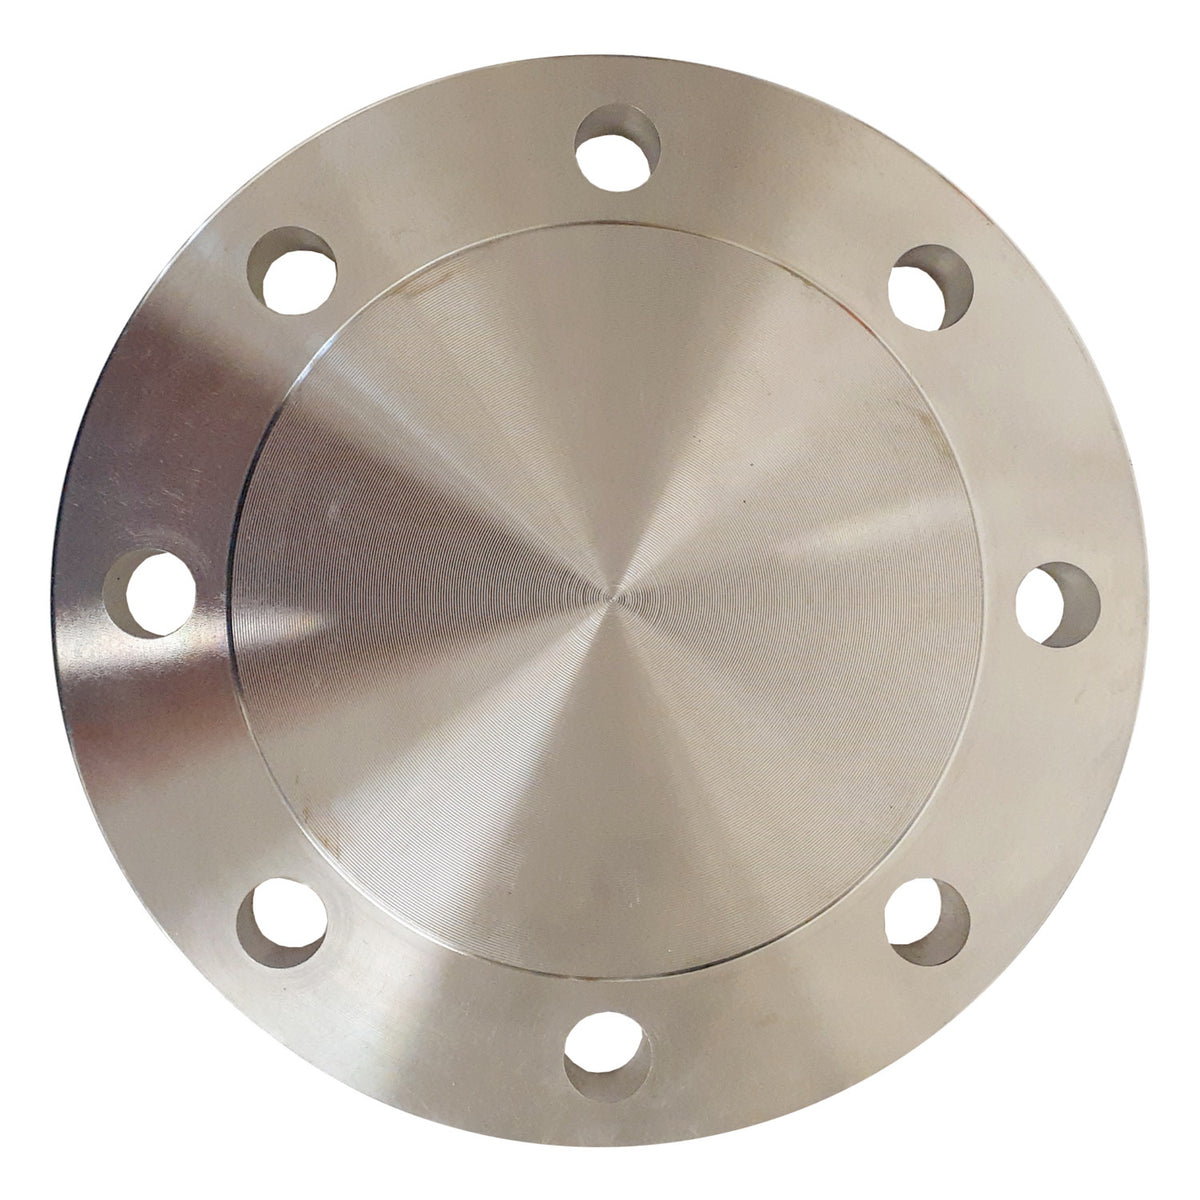 4 304 Stainless Steel Blind Flange Class 150 Prm Filtration 0676